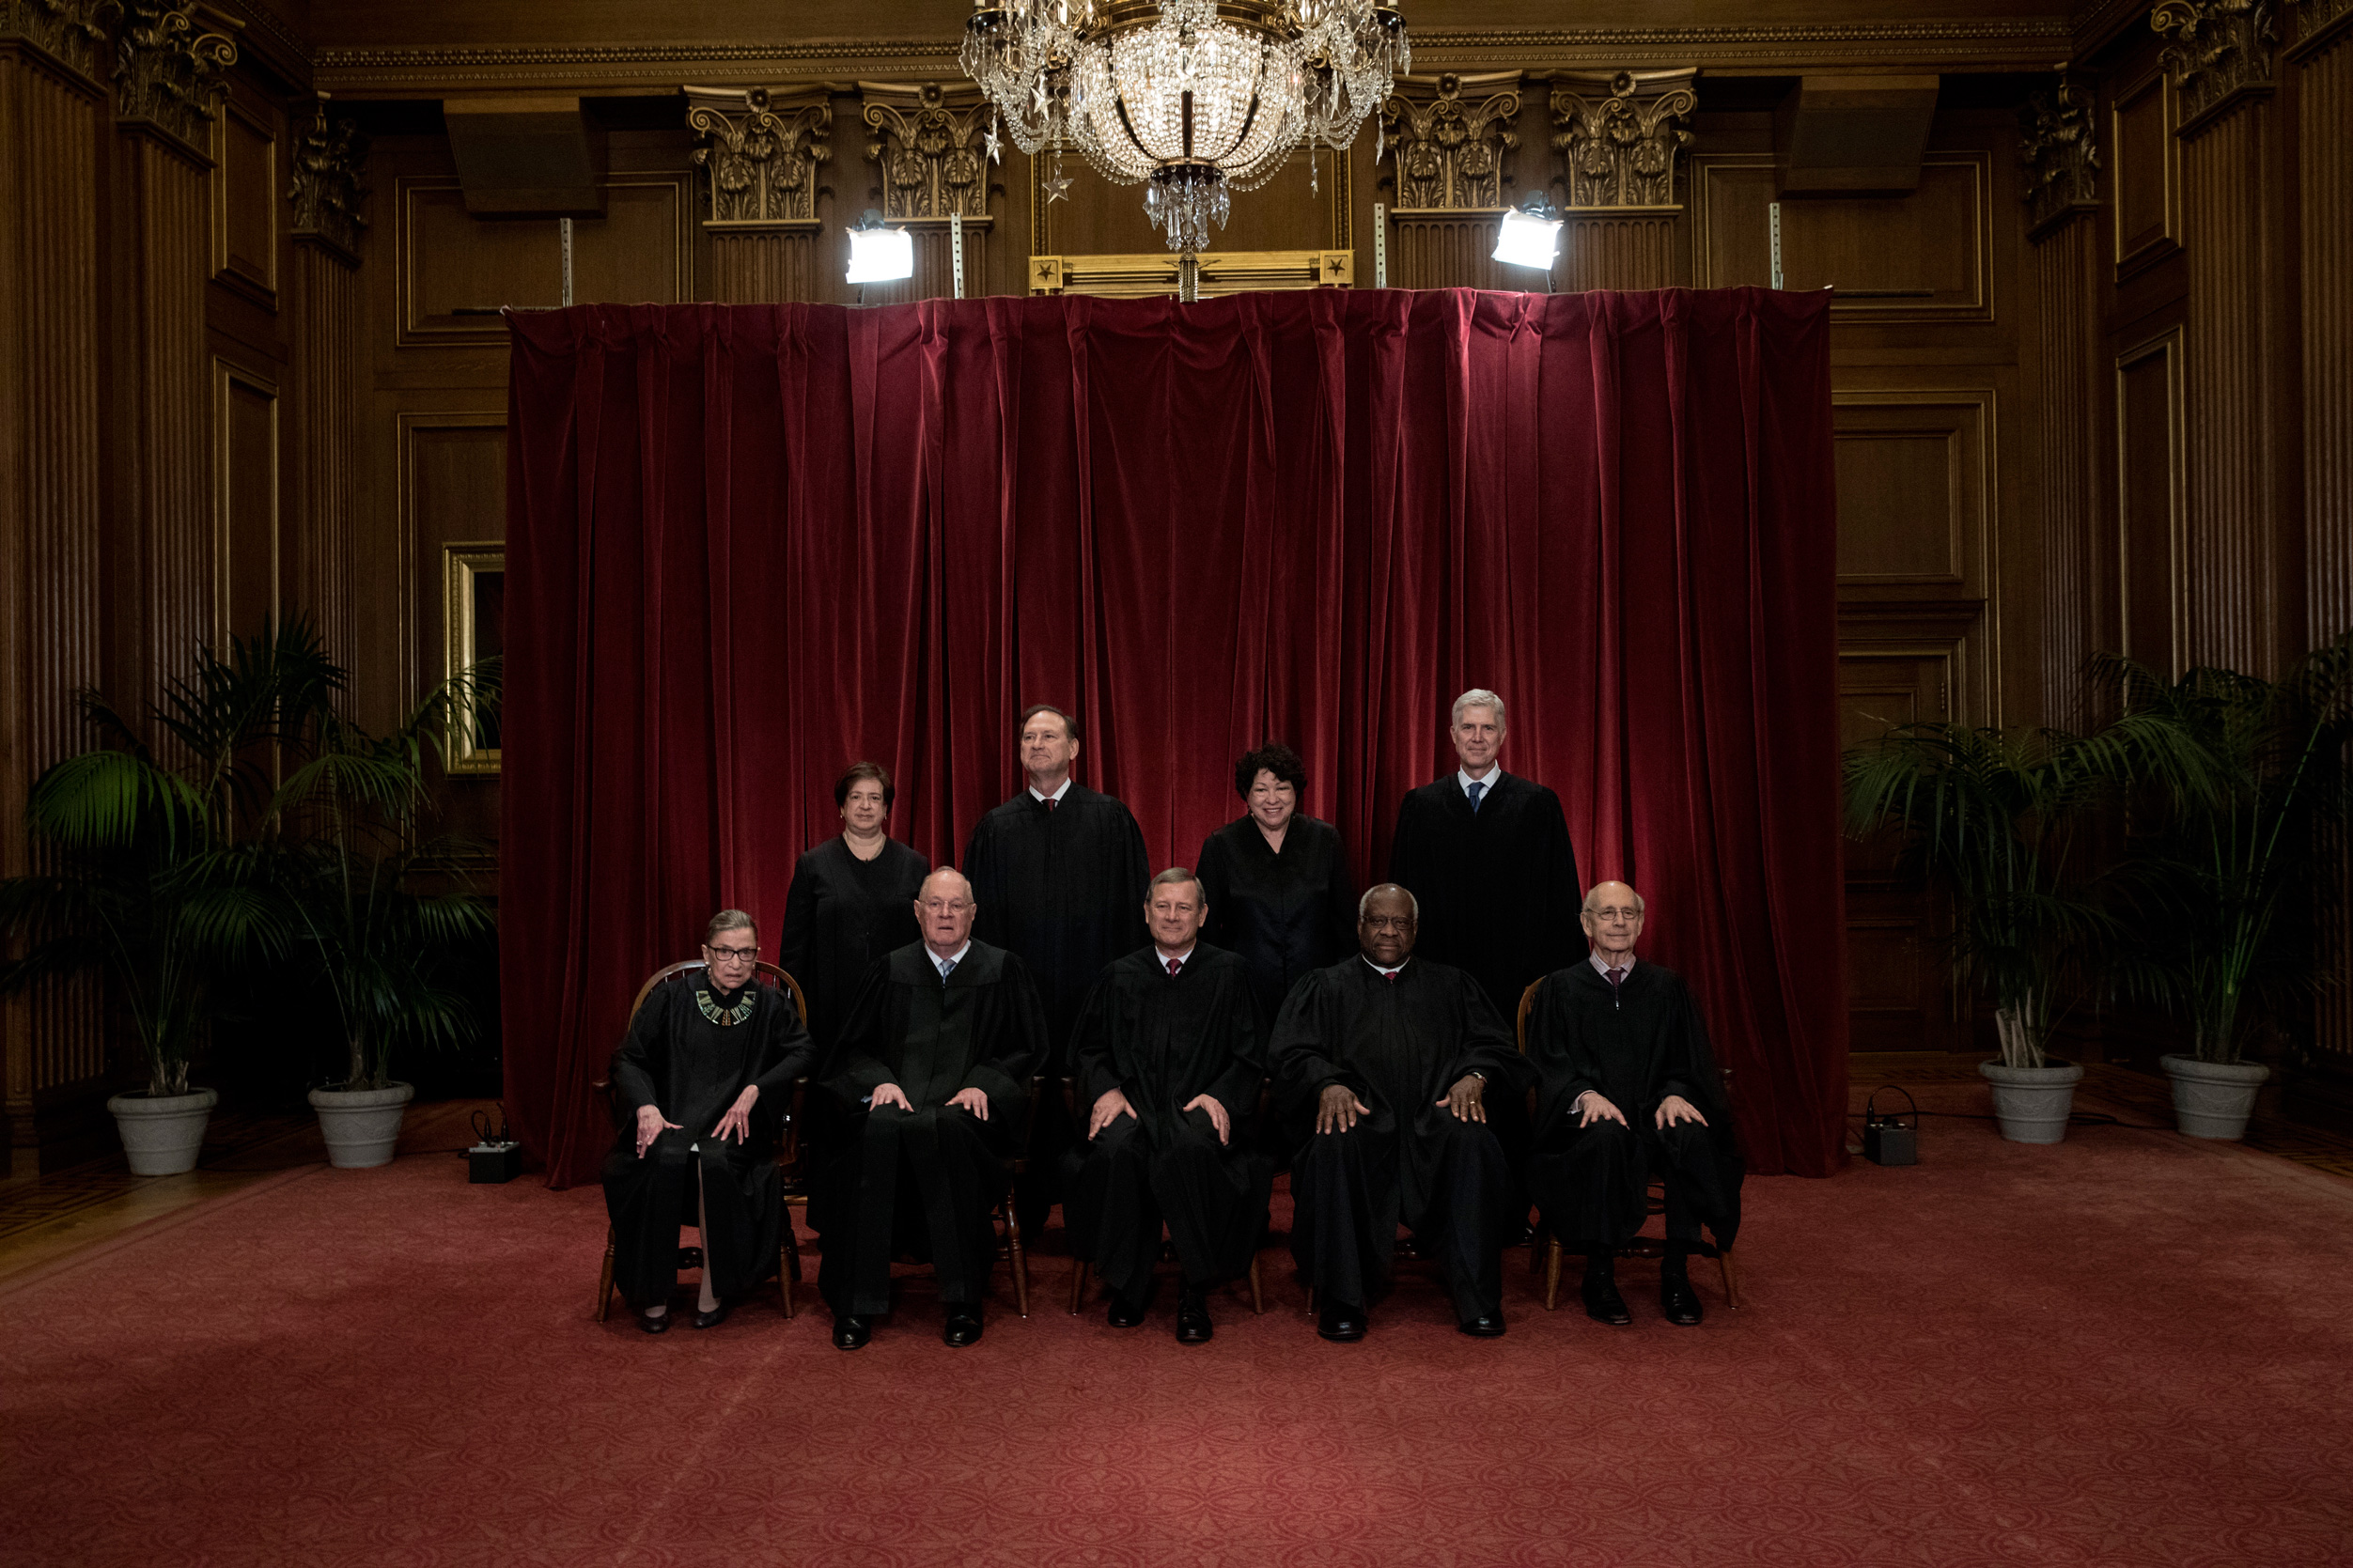 Supreme Court of The United States. Seated from left, Associate Justice Ruth Bader Ginsburg, Associate Justice Anthony M. Kennedy, Chief Justice of the United States John G. Roberts, Associate Justice Clarence Thomas, and Associate Justice Stephen Breyer. Standing behind from left, Associate Justice Elena Kagan, Associate Justice Samuel Alito Jr., Associate Justice Sonia Sotomayor, and Associate Justice Neil Gorsuch. (Christopher Morris&mdash;Christopher Morris/VII)